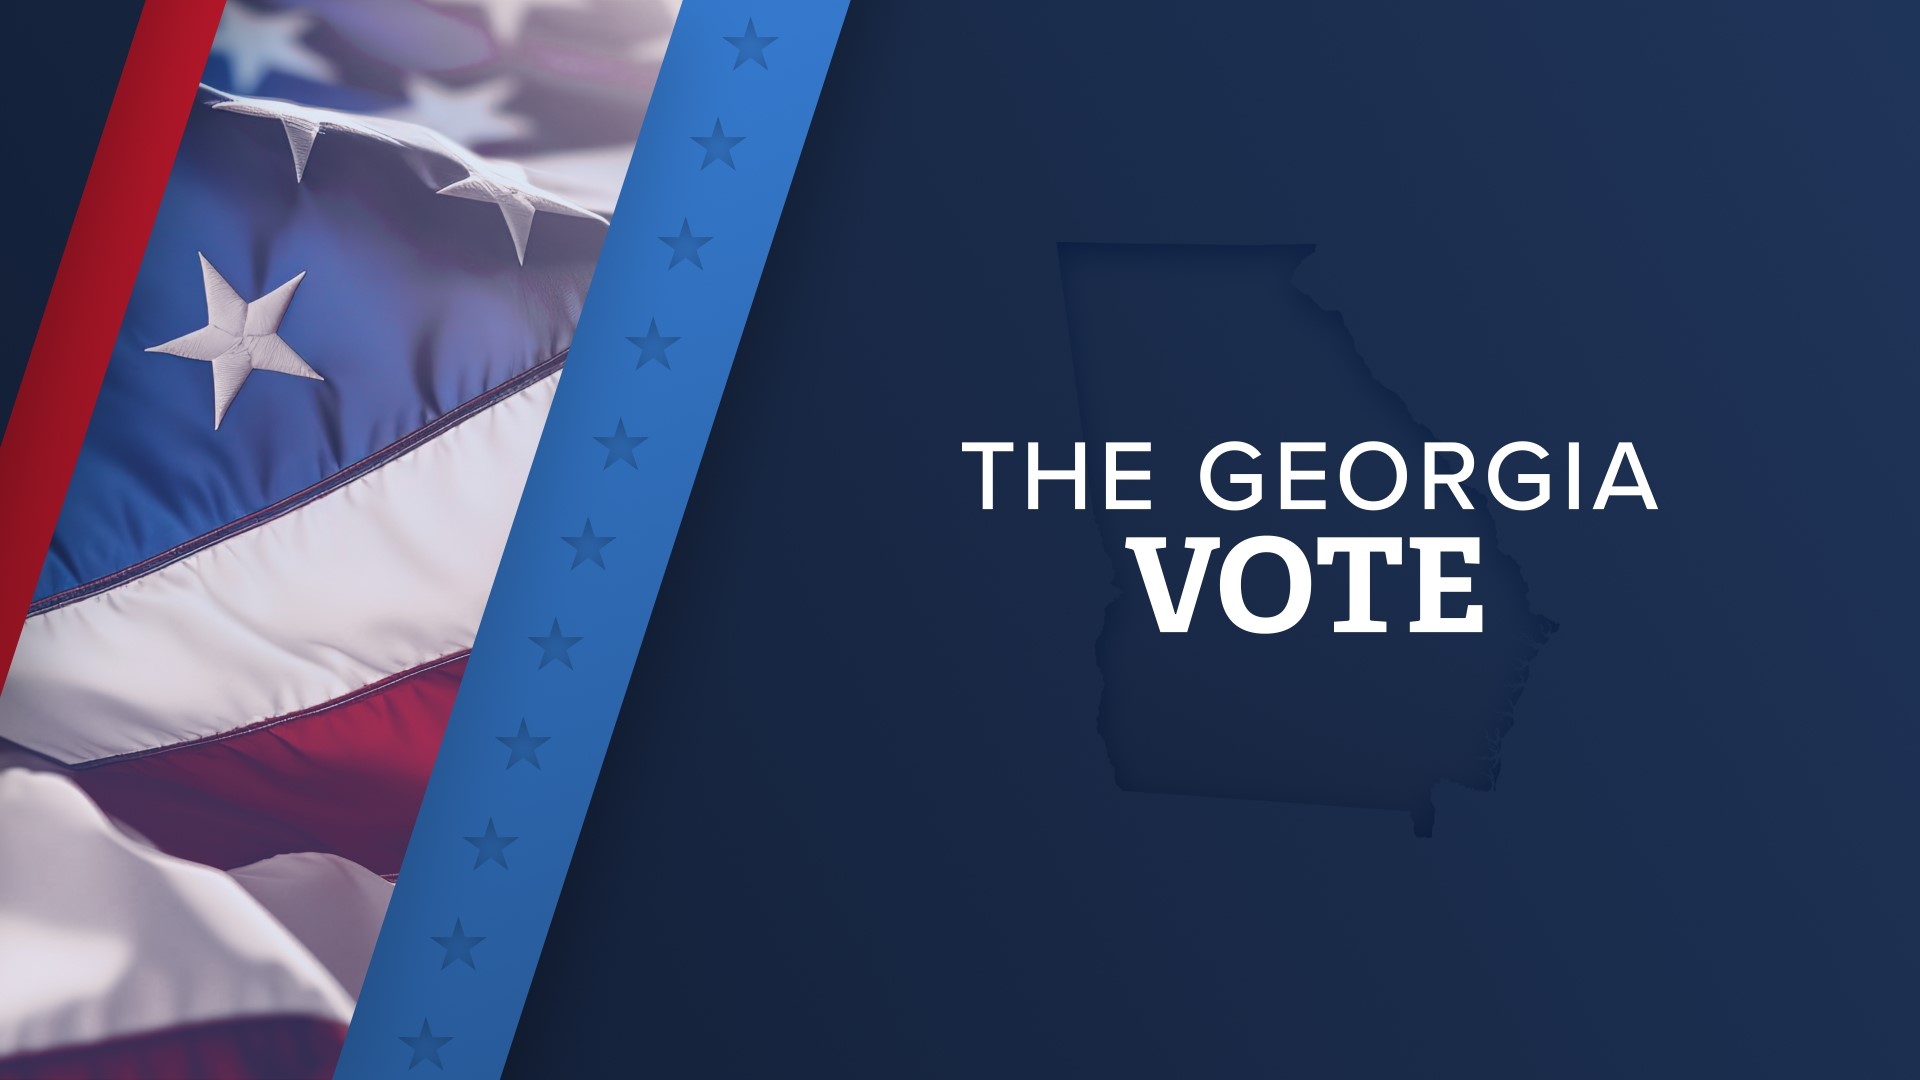 In this week's episode of The Georgia Vote, 11Alive talks with Governor Brian Kemp and discusses President Biden's recent address at Morehouse Collage.